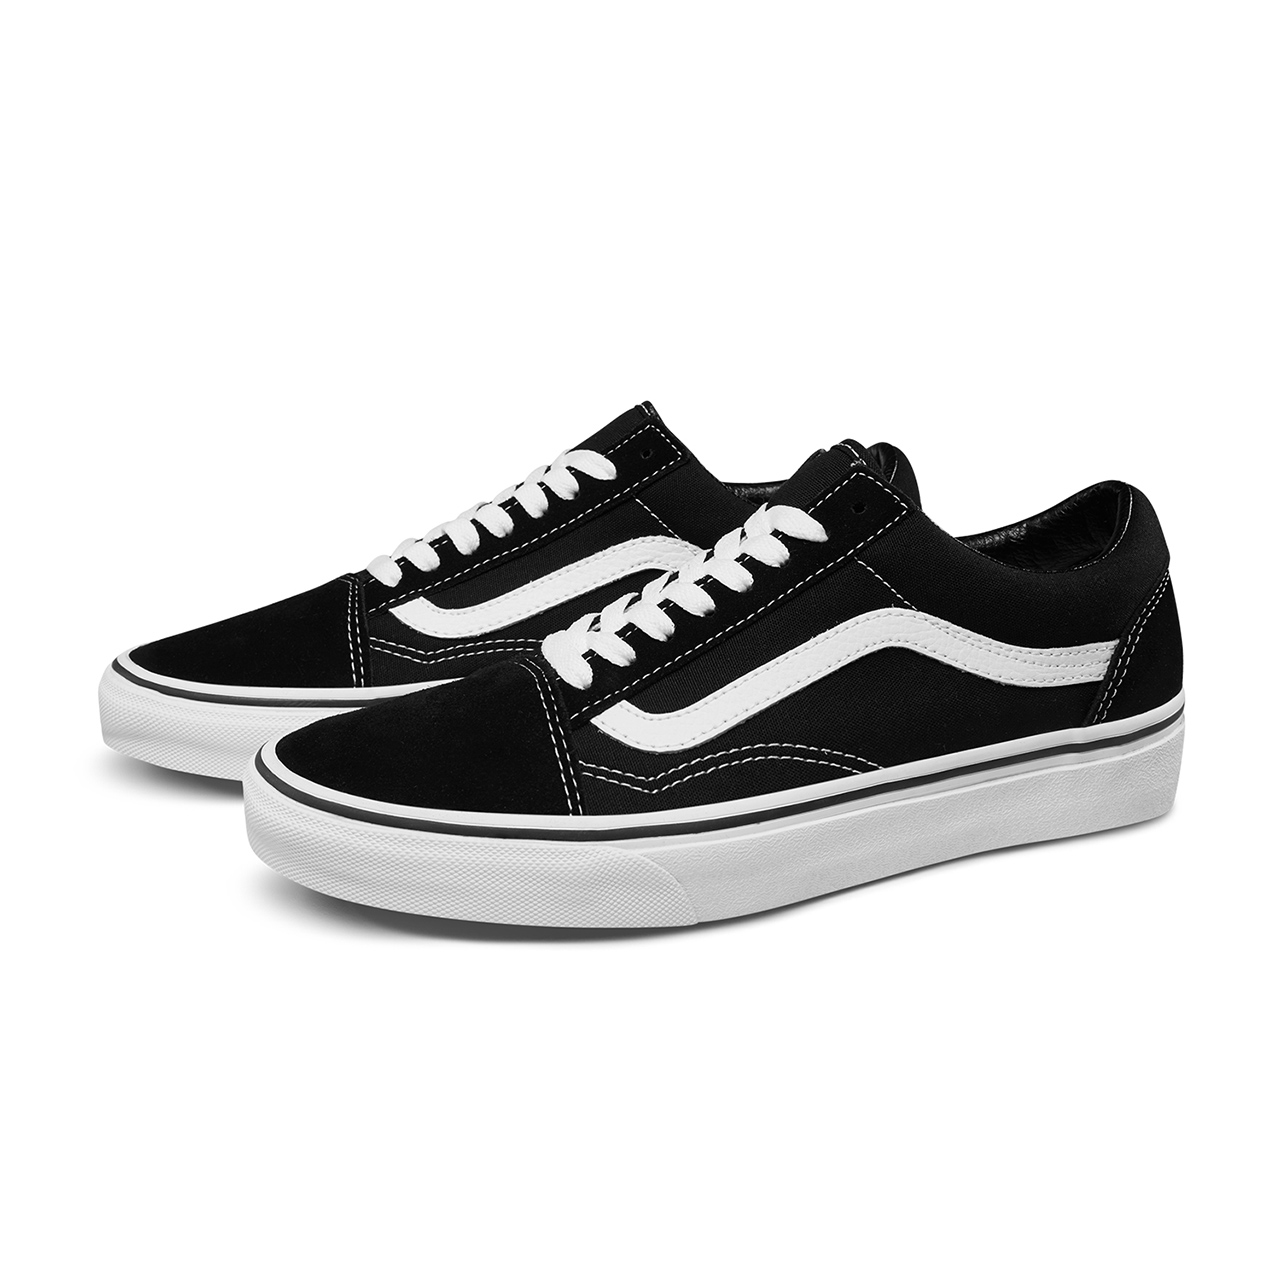 China Wholesale Supplier Branded shoes vans, join us on whatsapp | Yupoo